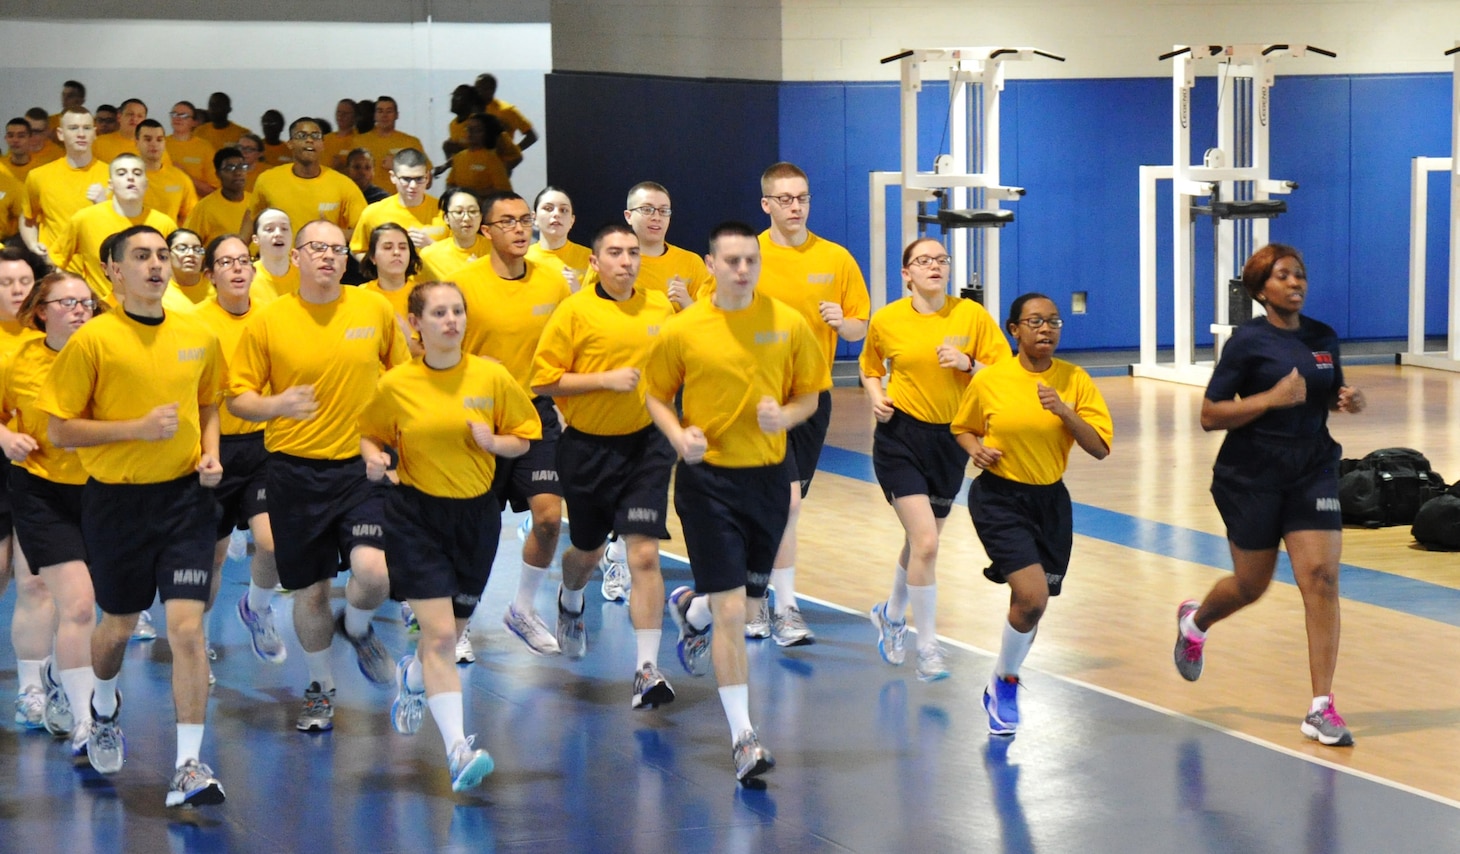 Navy Sets New Physical Fitness Standard to Start Boot Camp > United